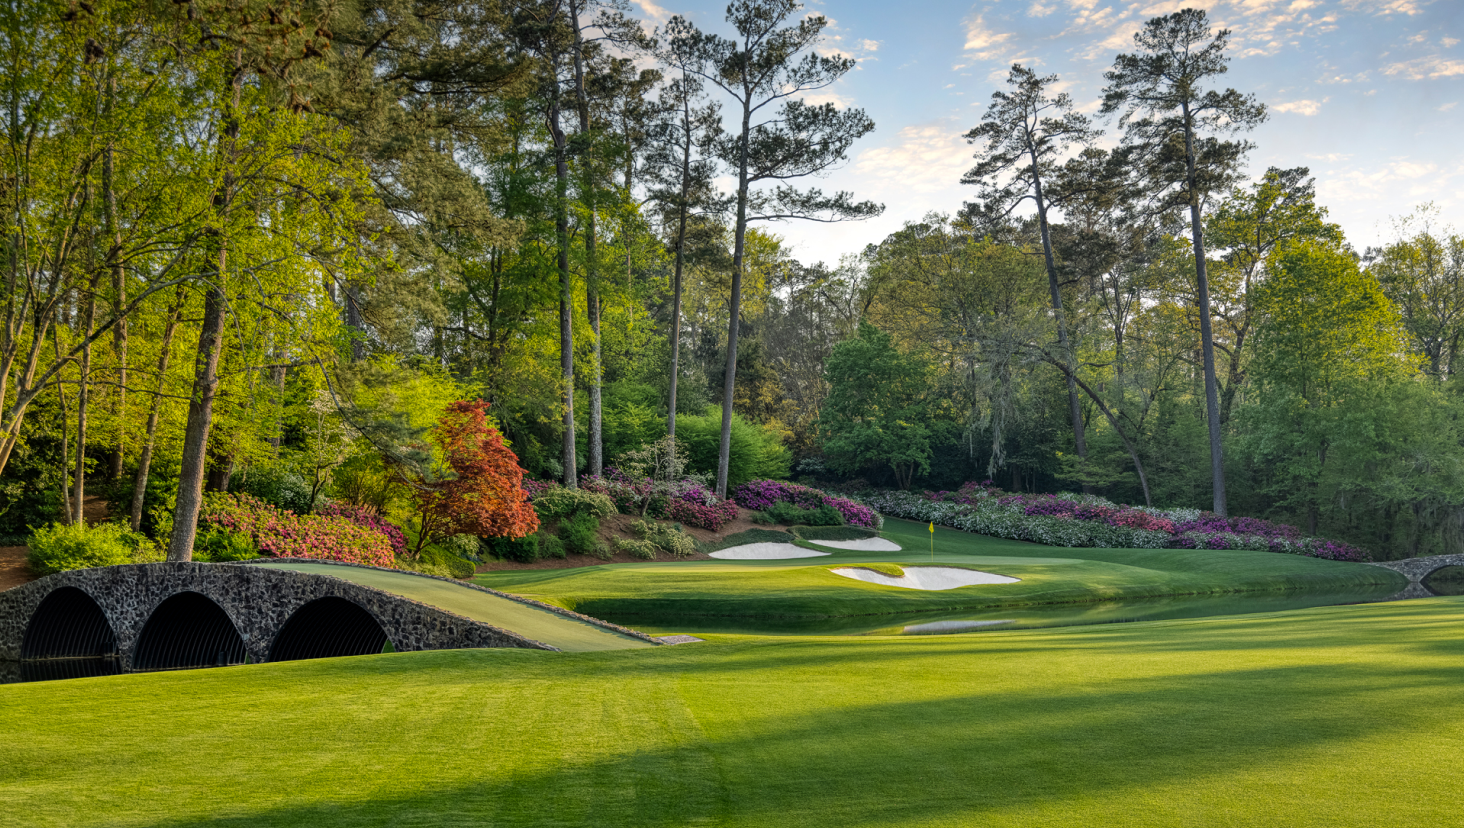 A fairway at the Masters